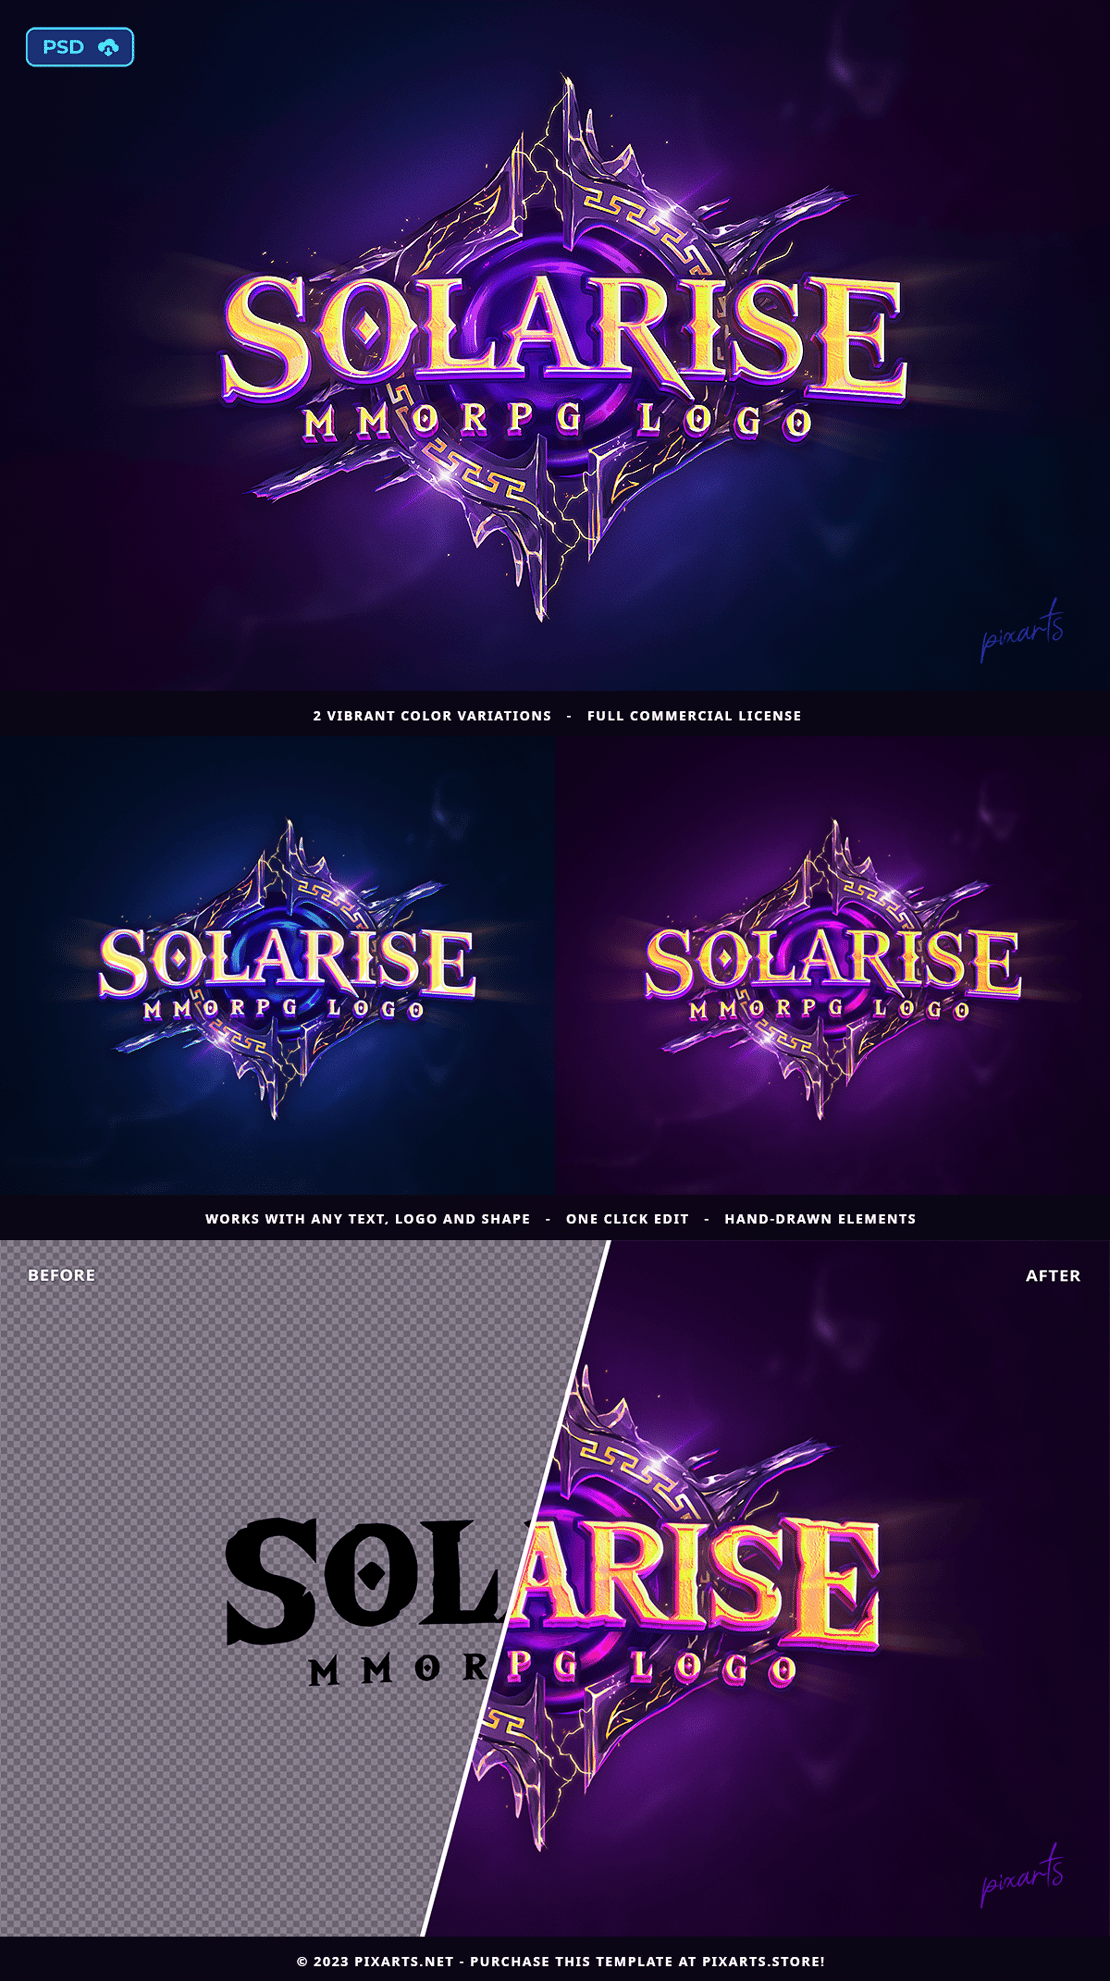 Solarise - Stylized Gaming Logo PSD Template